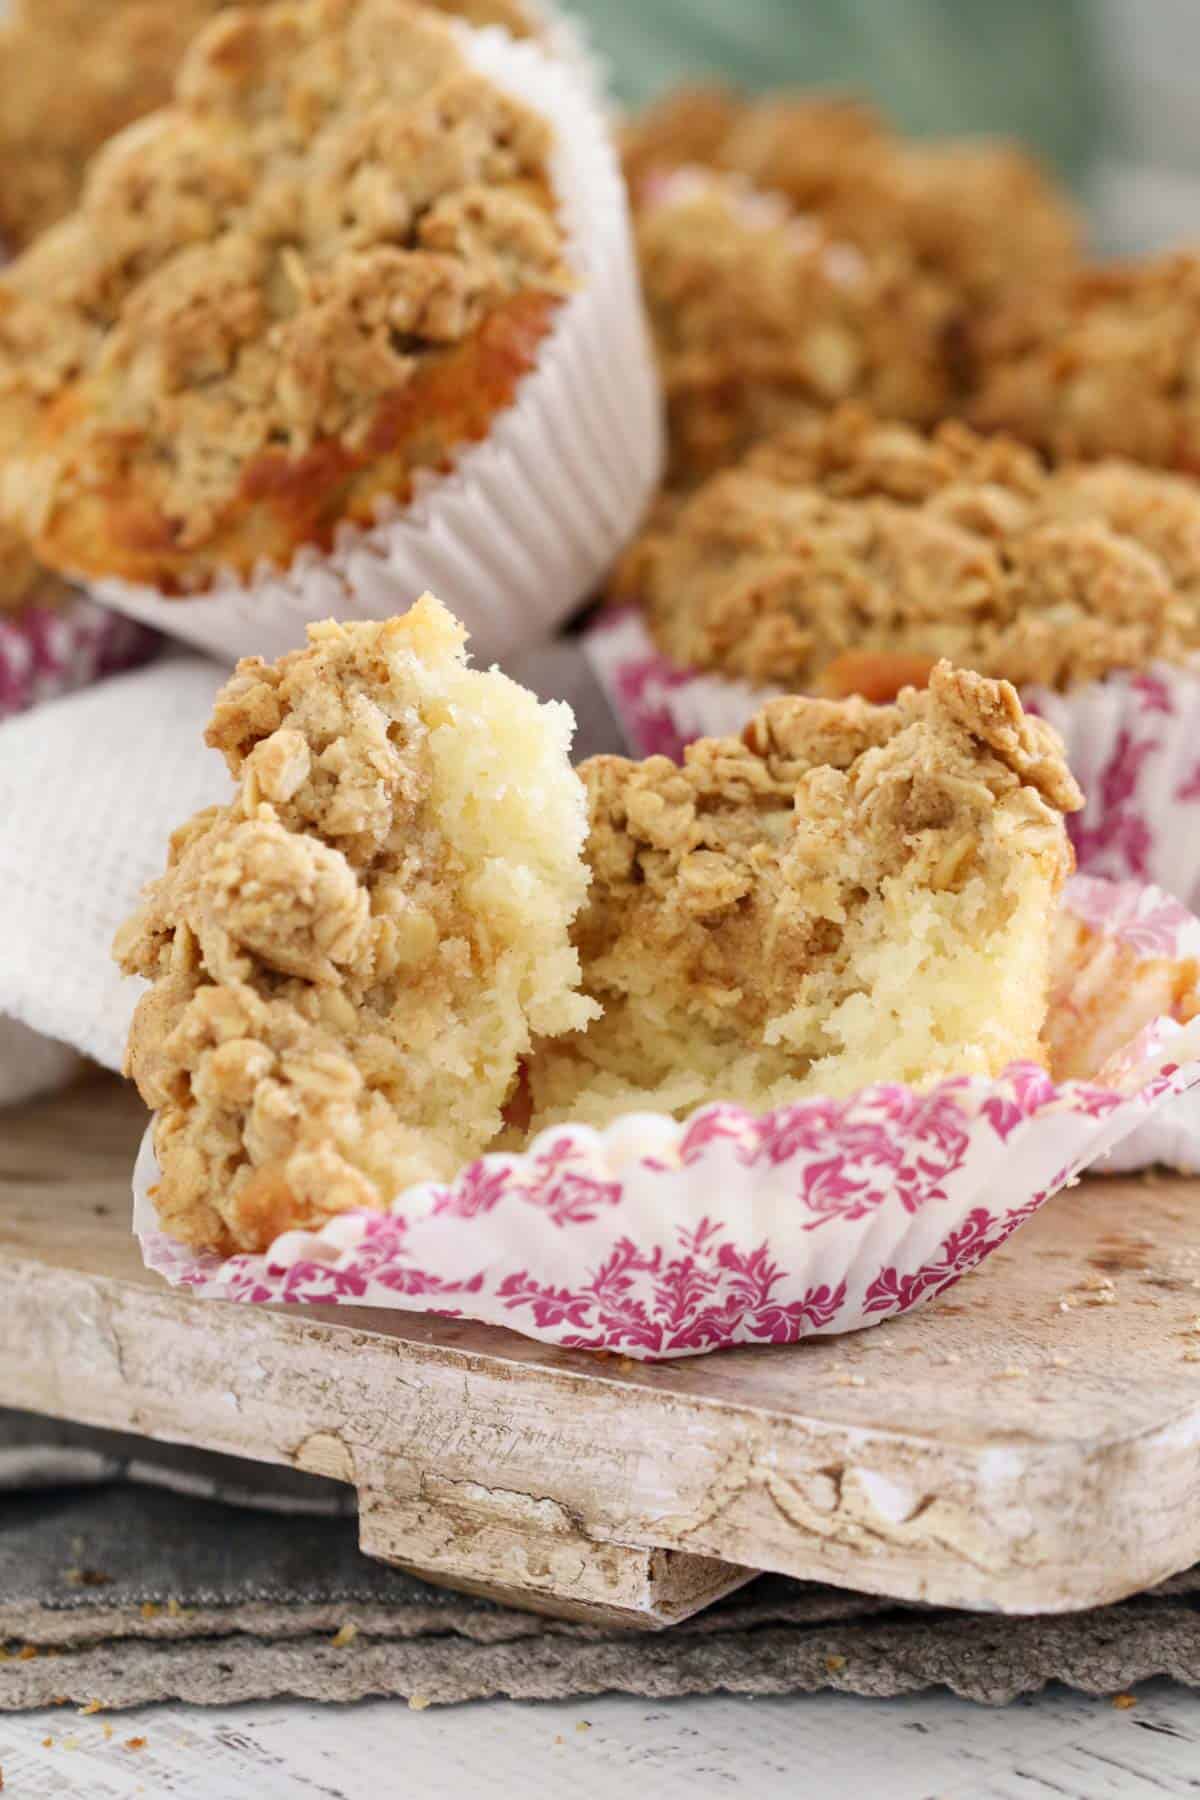 An apple muffin split in half to show the texture inside.